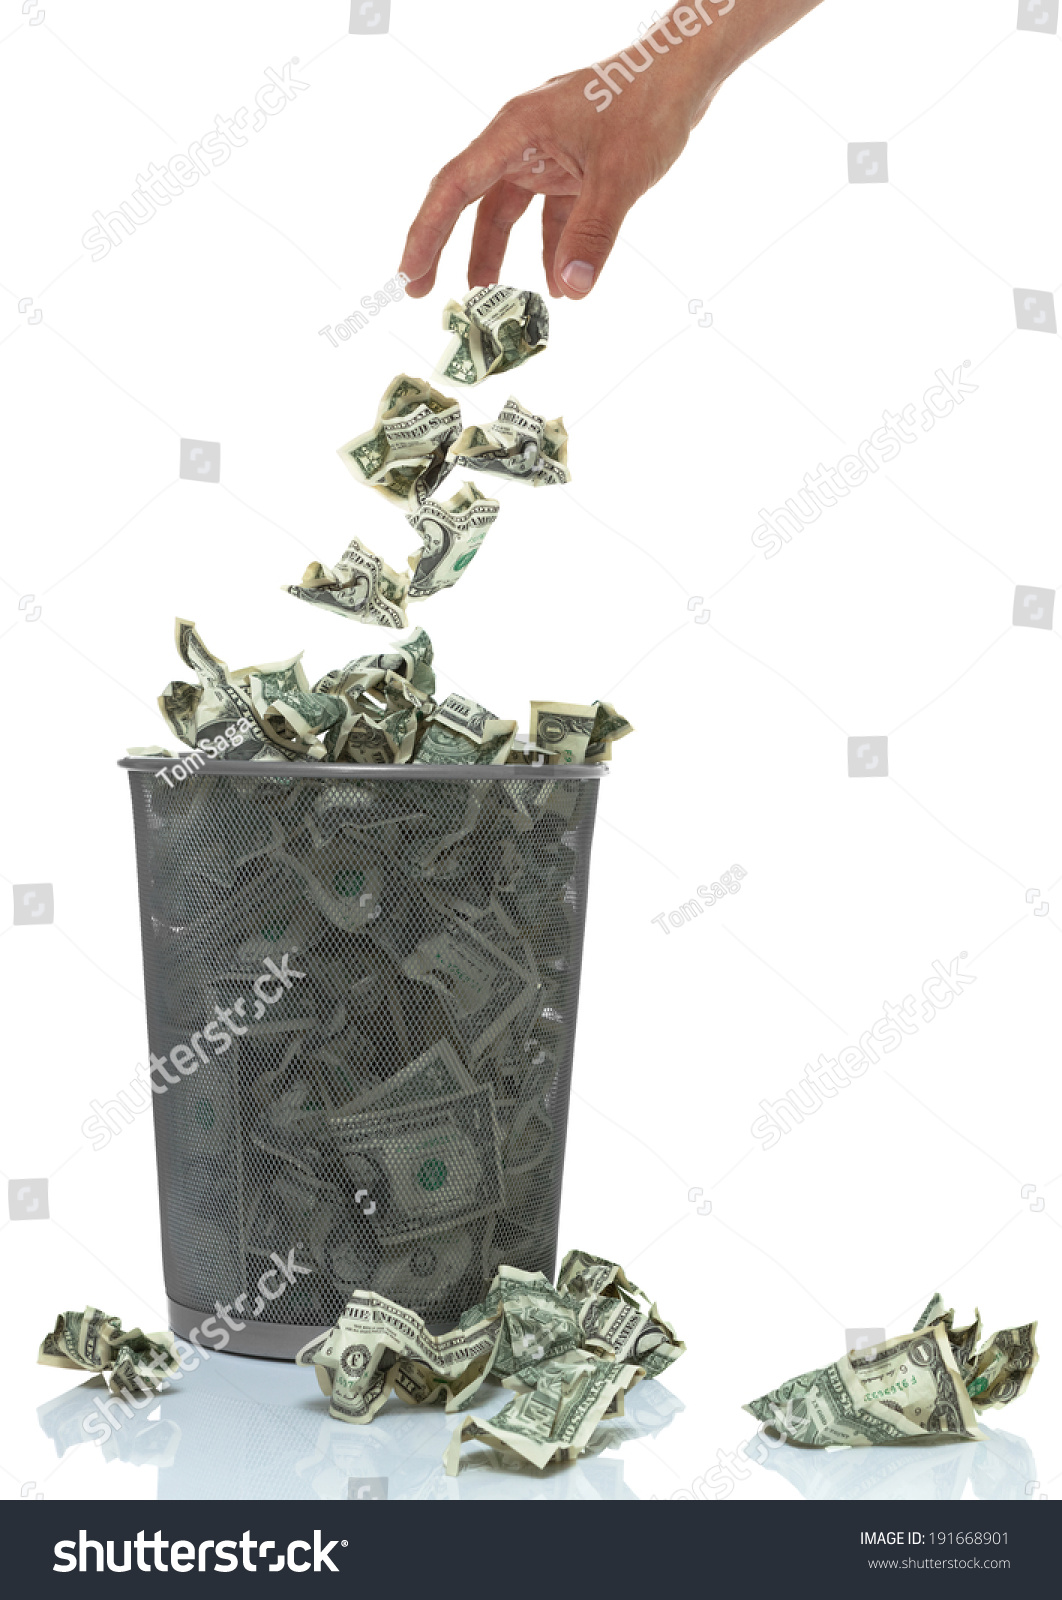 clipart throwing away money - photo #14